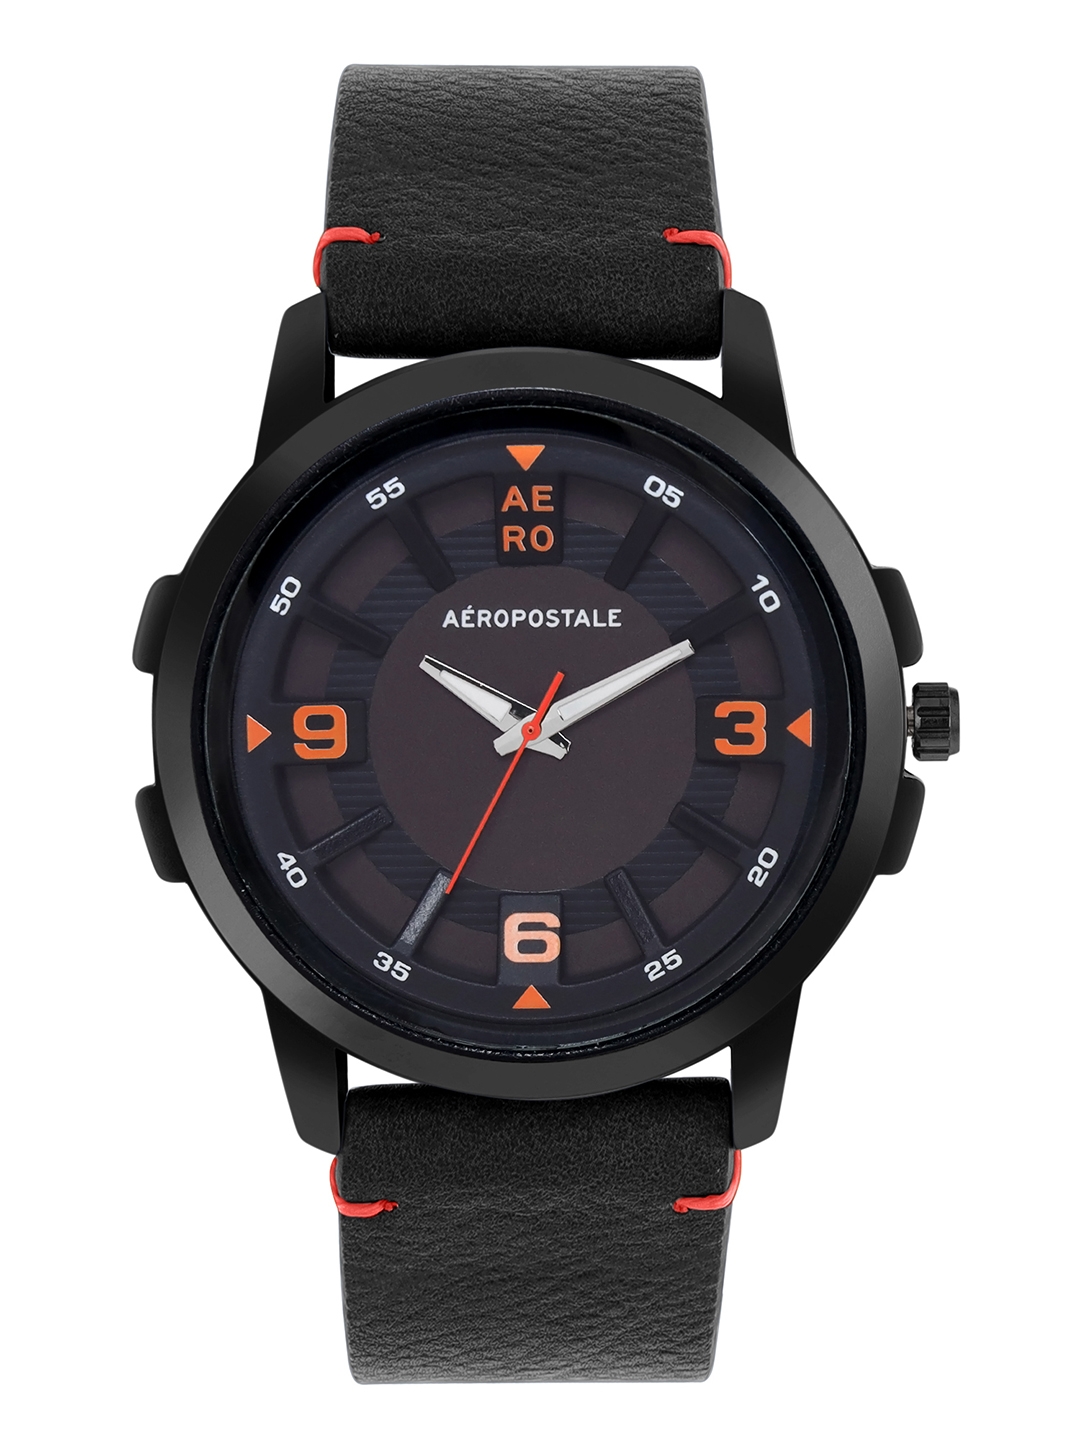 Aeropostale | Aeropostale "AERO_AW_A6-2_BLK" Classic Men’s Analog Quartz Wrist Watch, Black Metal Alloy case, Classic Black Dial with contrasting Red white hand, Leather  wrist Band  Water resistant 3.0 ATM.